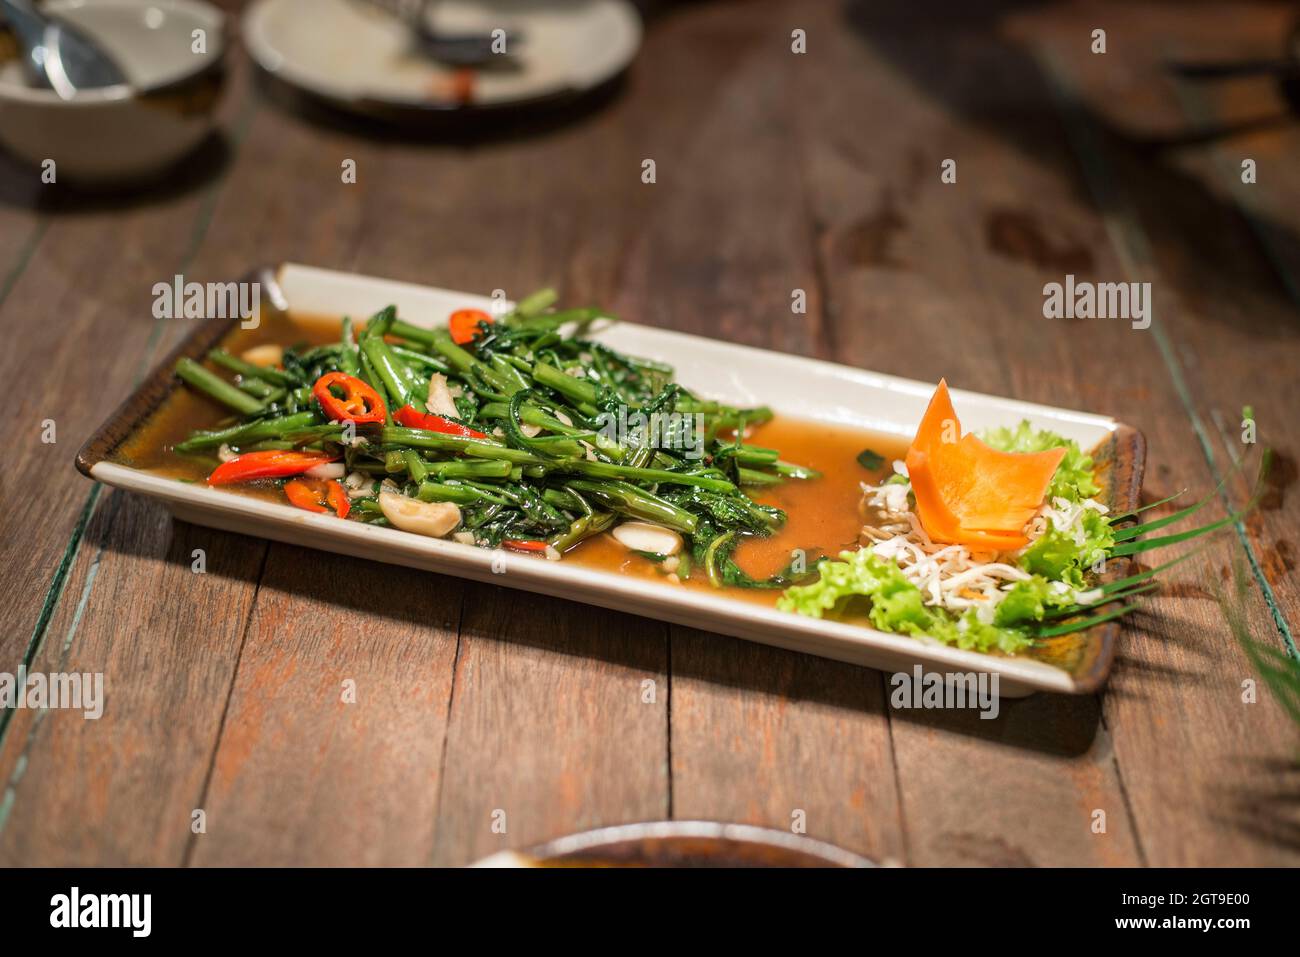 High Angle View Of Chopped Vegetables On Table Stock Photo